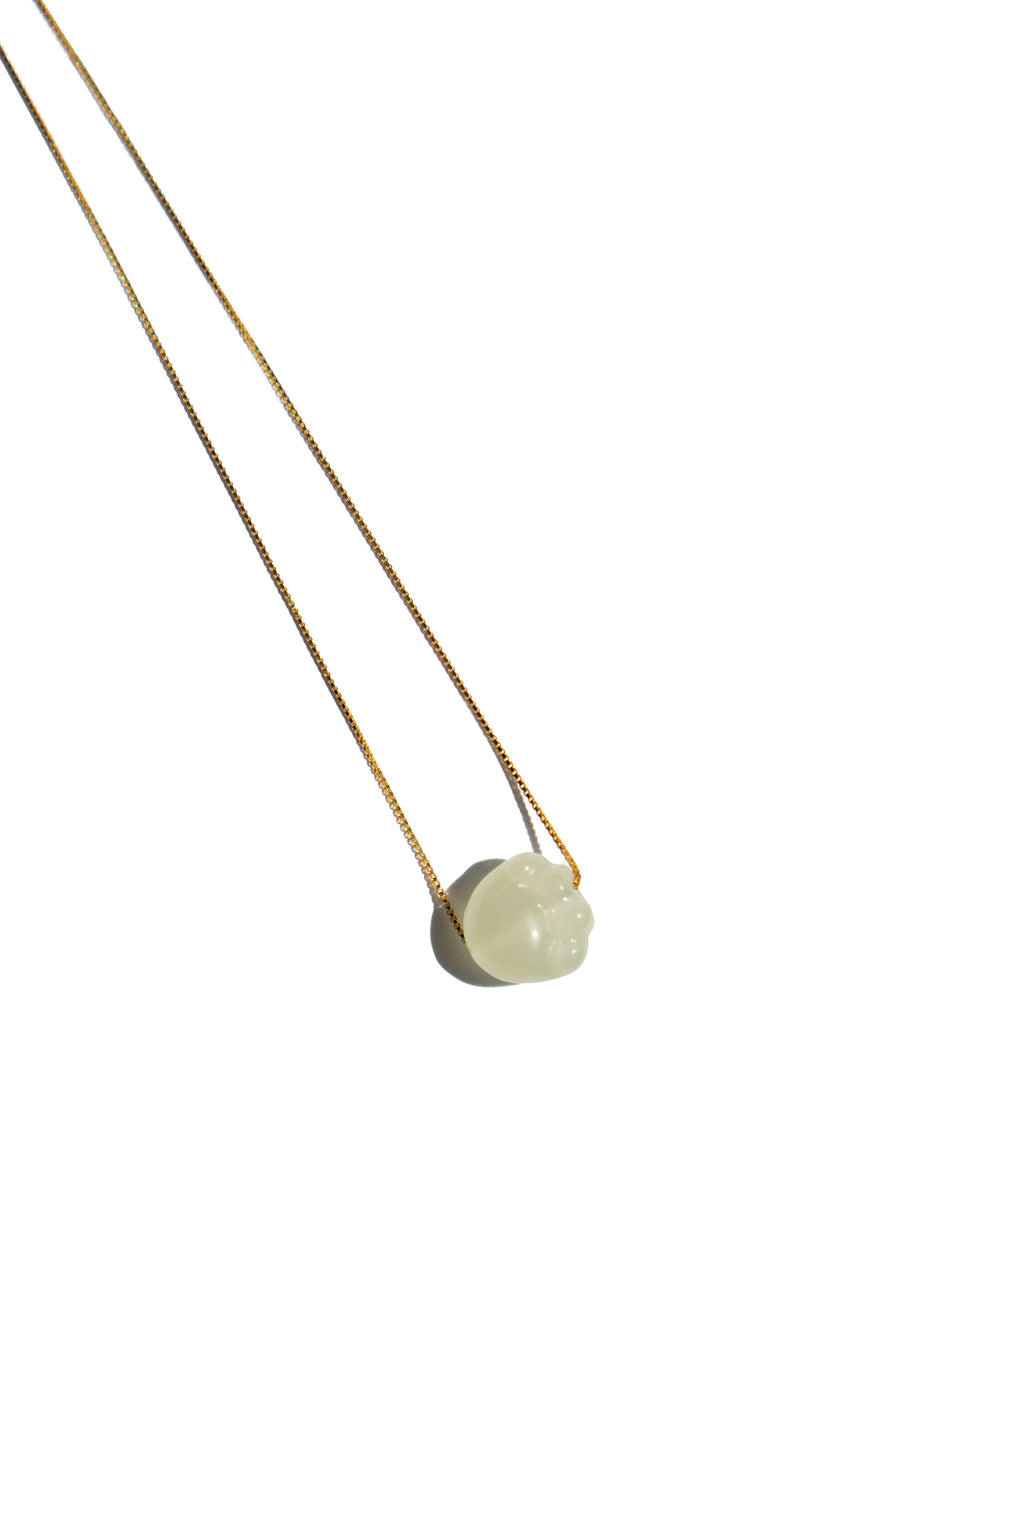 seree-cat-paw-green-nephrite-jade-necklace-off-white